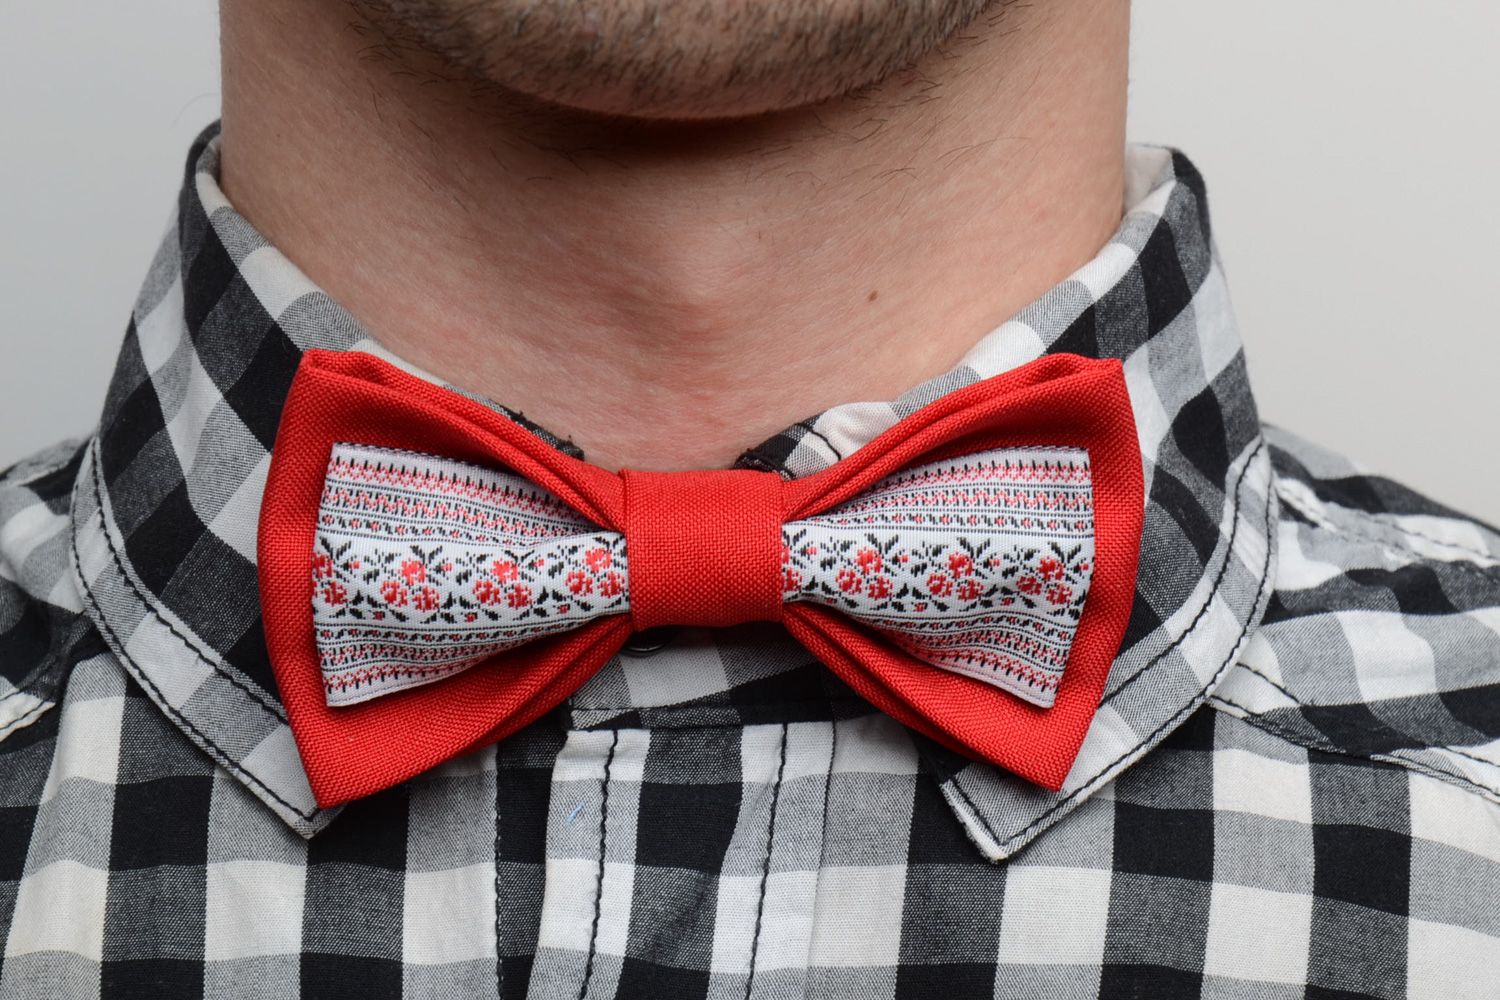 Handmade designer bow tie sewn of red and patterned fabrics in ethnic style photo 1